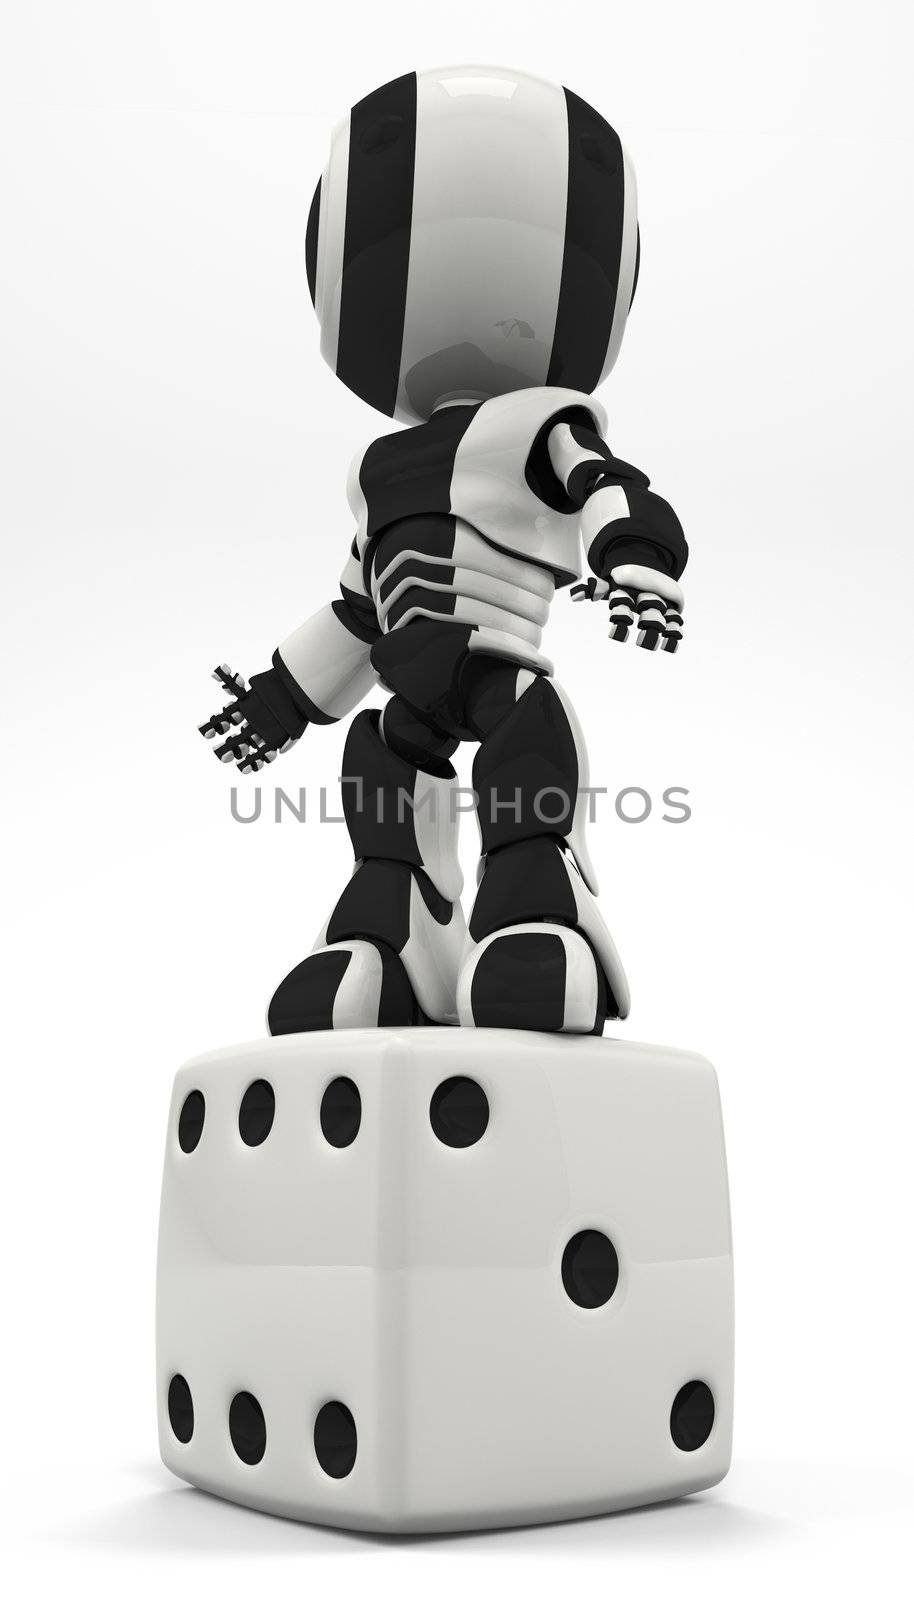 A robot standing victorious on dice. Could show his triumph over chance and overcoming his lot in life.